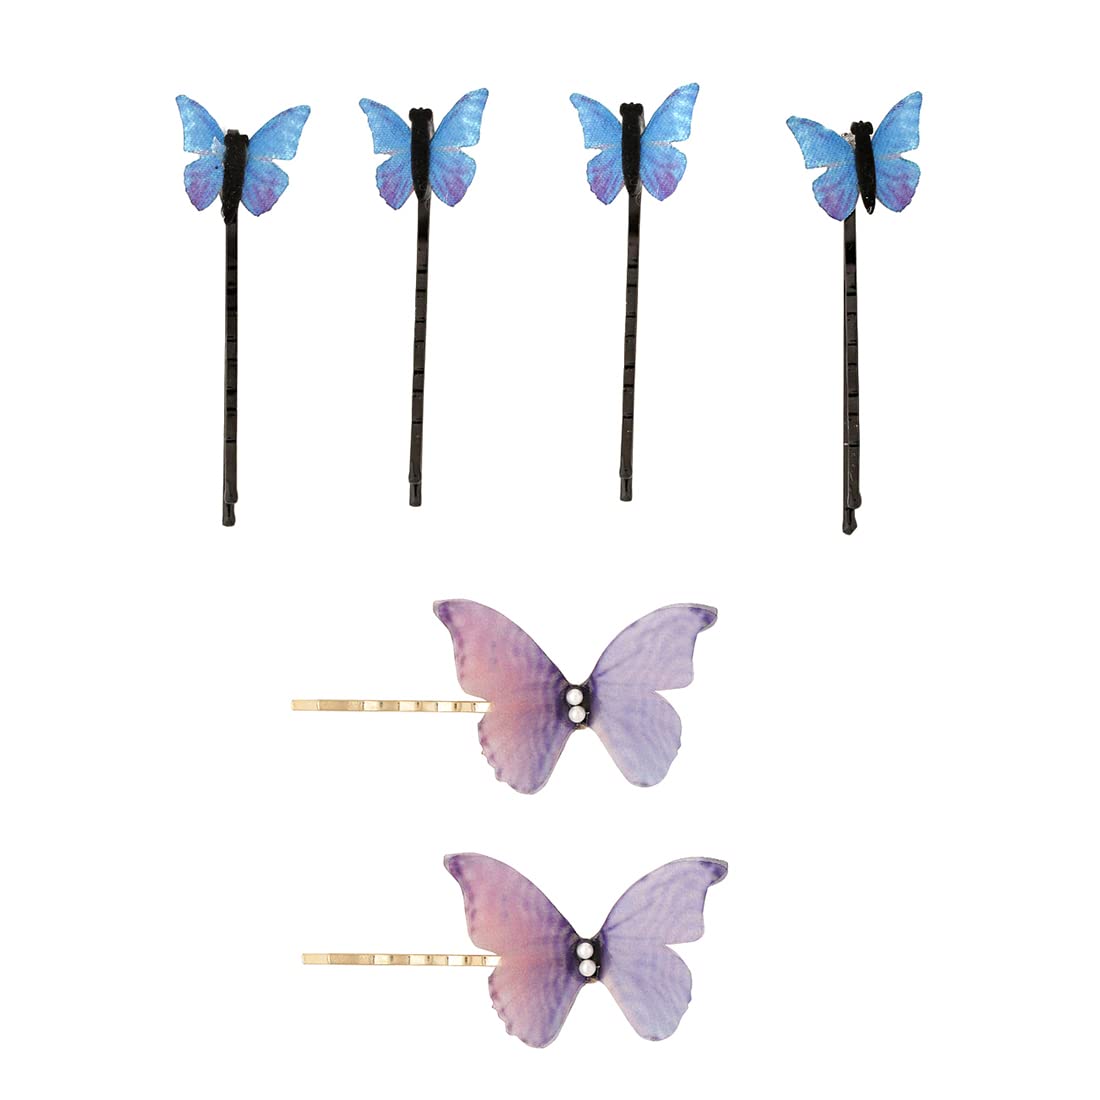 Melbees by Yellow Chimes Hair Pins for Girls Kids Hair Accessories for Girls Hair Pin 7 Pcs Butterfly Bobby Pins for Hair Multicolor Charm Hairpin Bobby Hair Pins for Girls Kids Teens Toddlers